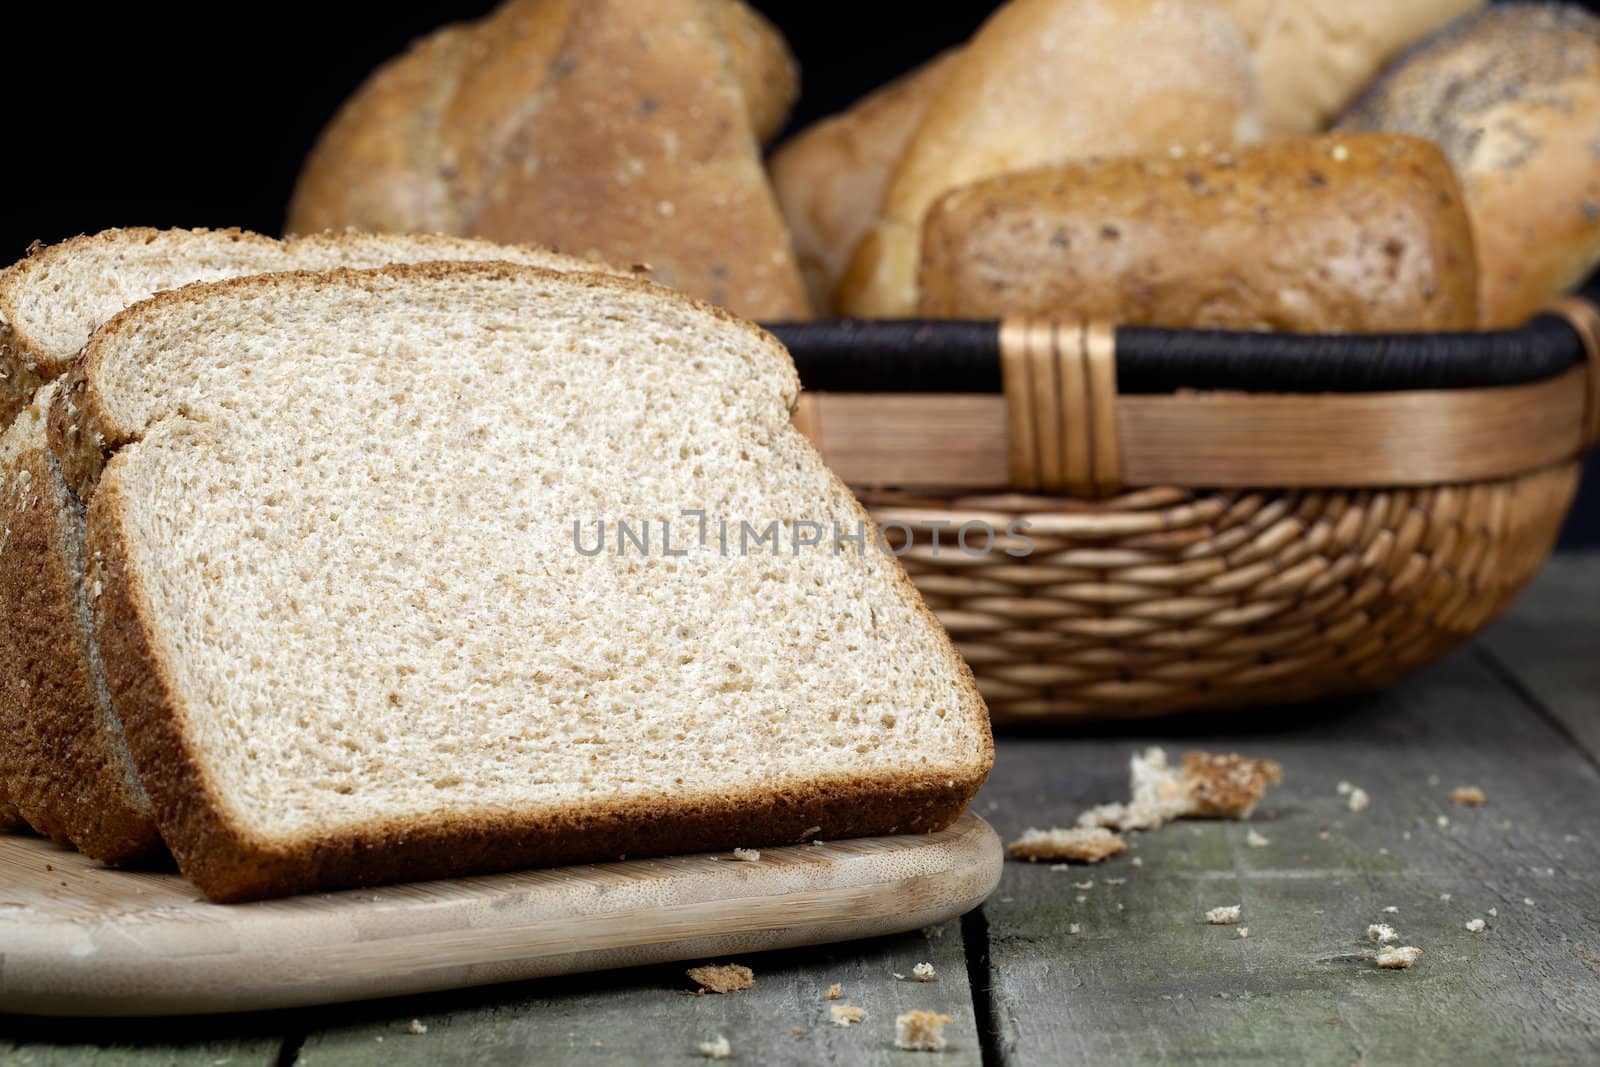 Image of a slice bread on a wooden table